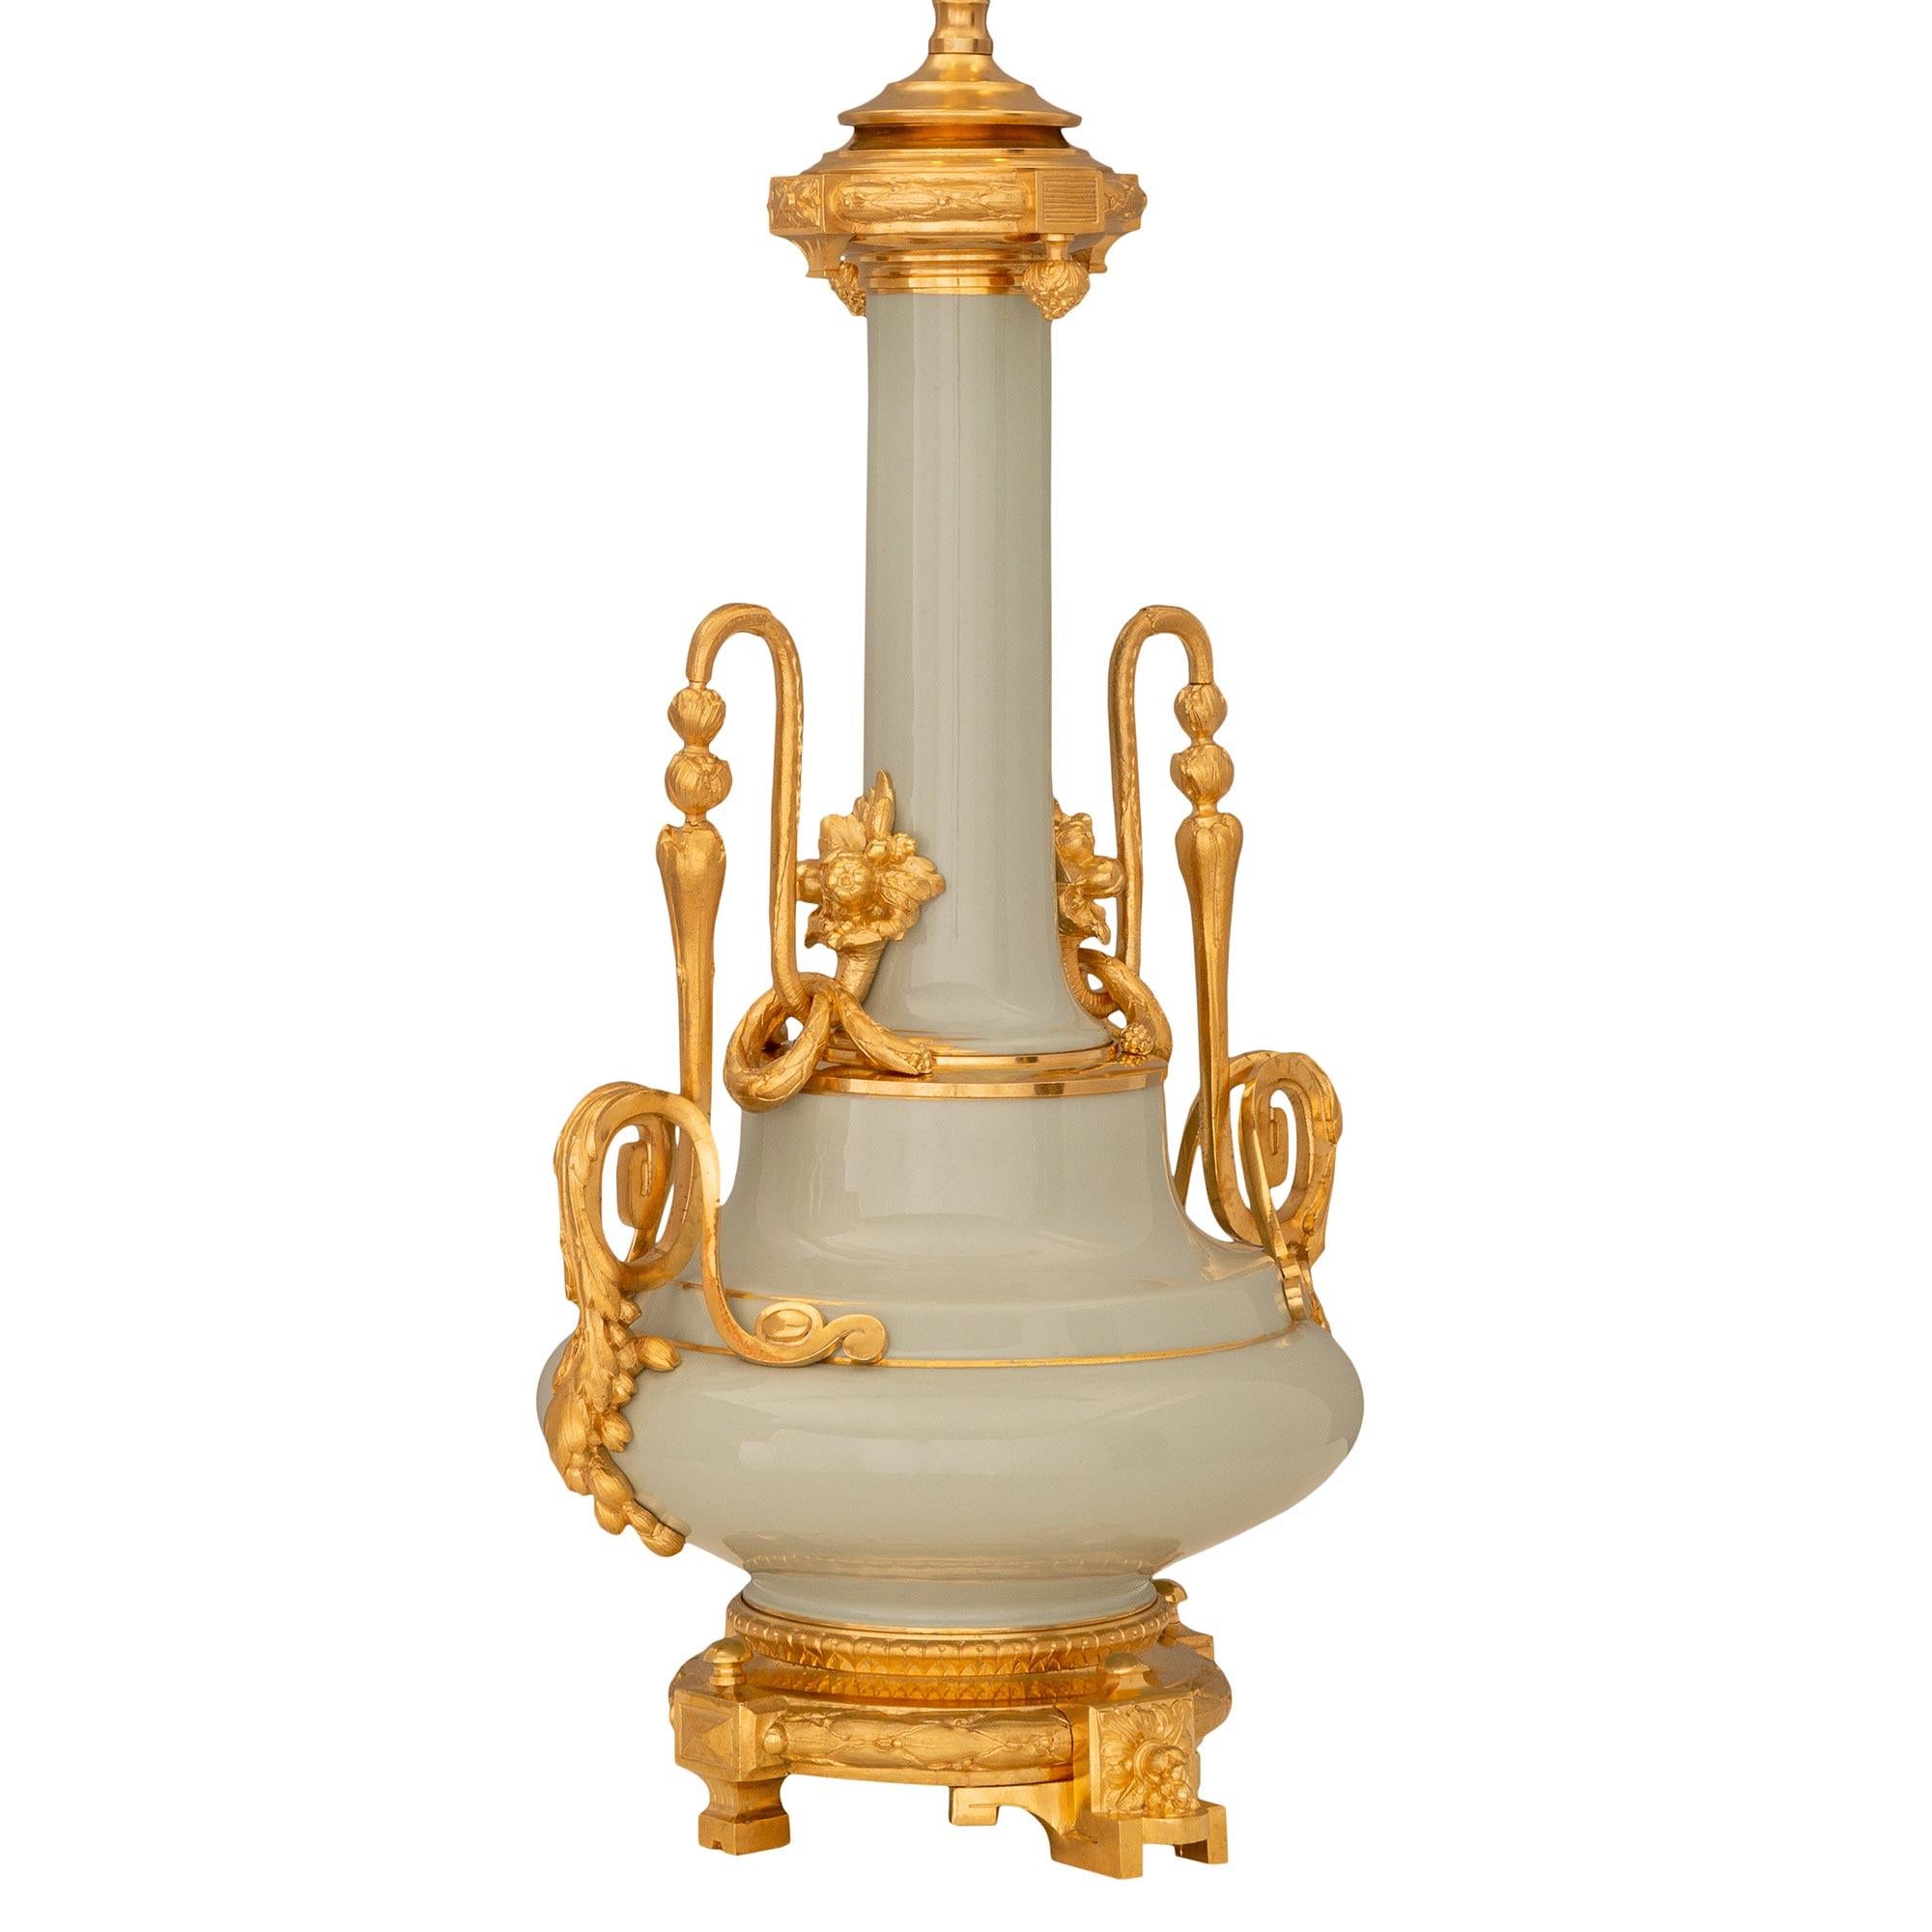 A beautiful pair of French 19th century Louis XVI st. celadon porcelain and ormolu lamps. Each lamp is raised by an elegant circular ormolu base with fine rosette block feet and wrap around berried laurel and Coeur de Rai designed bands. The